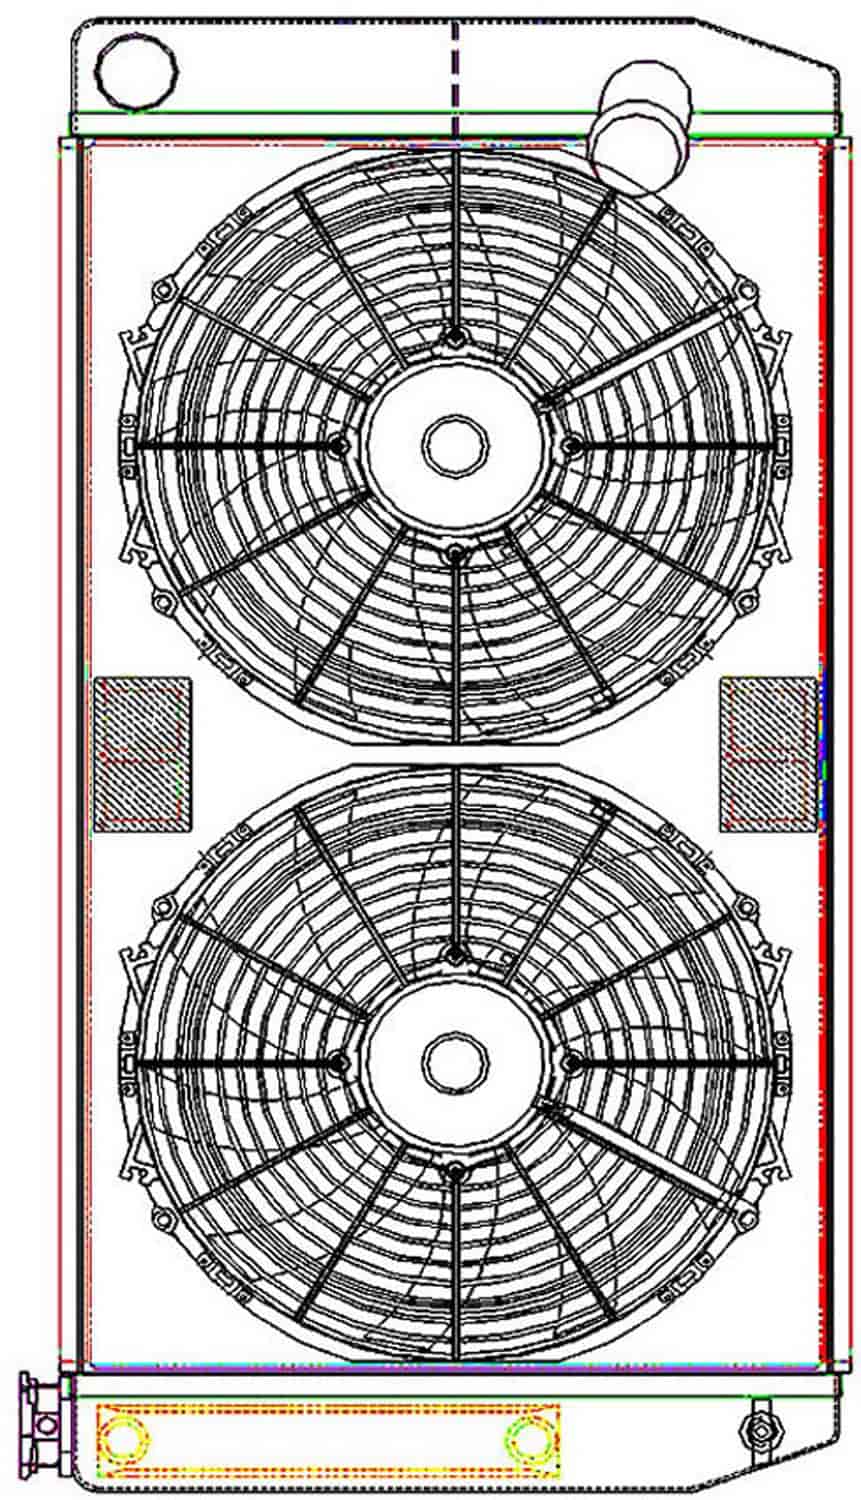 ClassicCool ComboUnit Universal Fit Radiator and Fan Dual Pass Crossflow Design 31" x 15.50" with Transmission Cooler